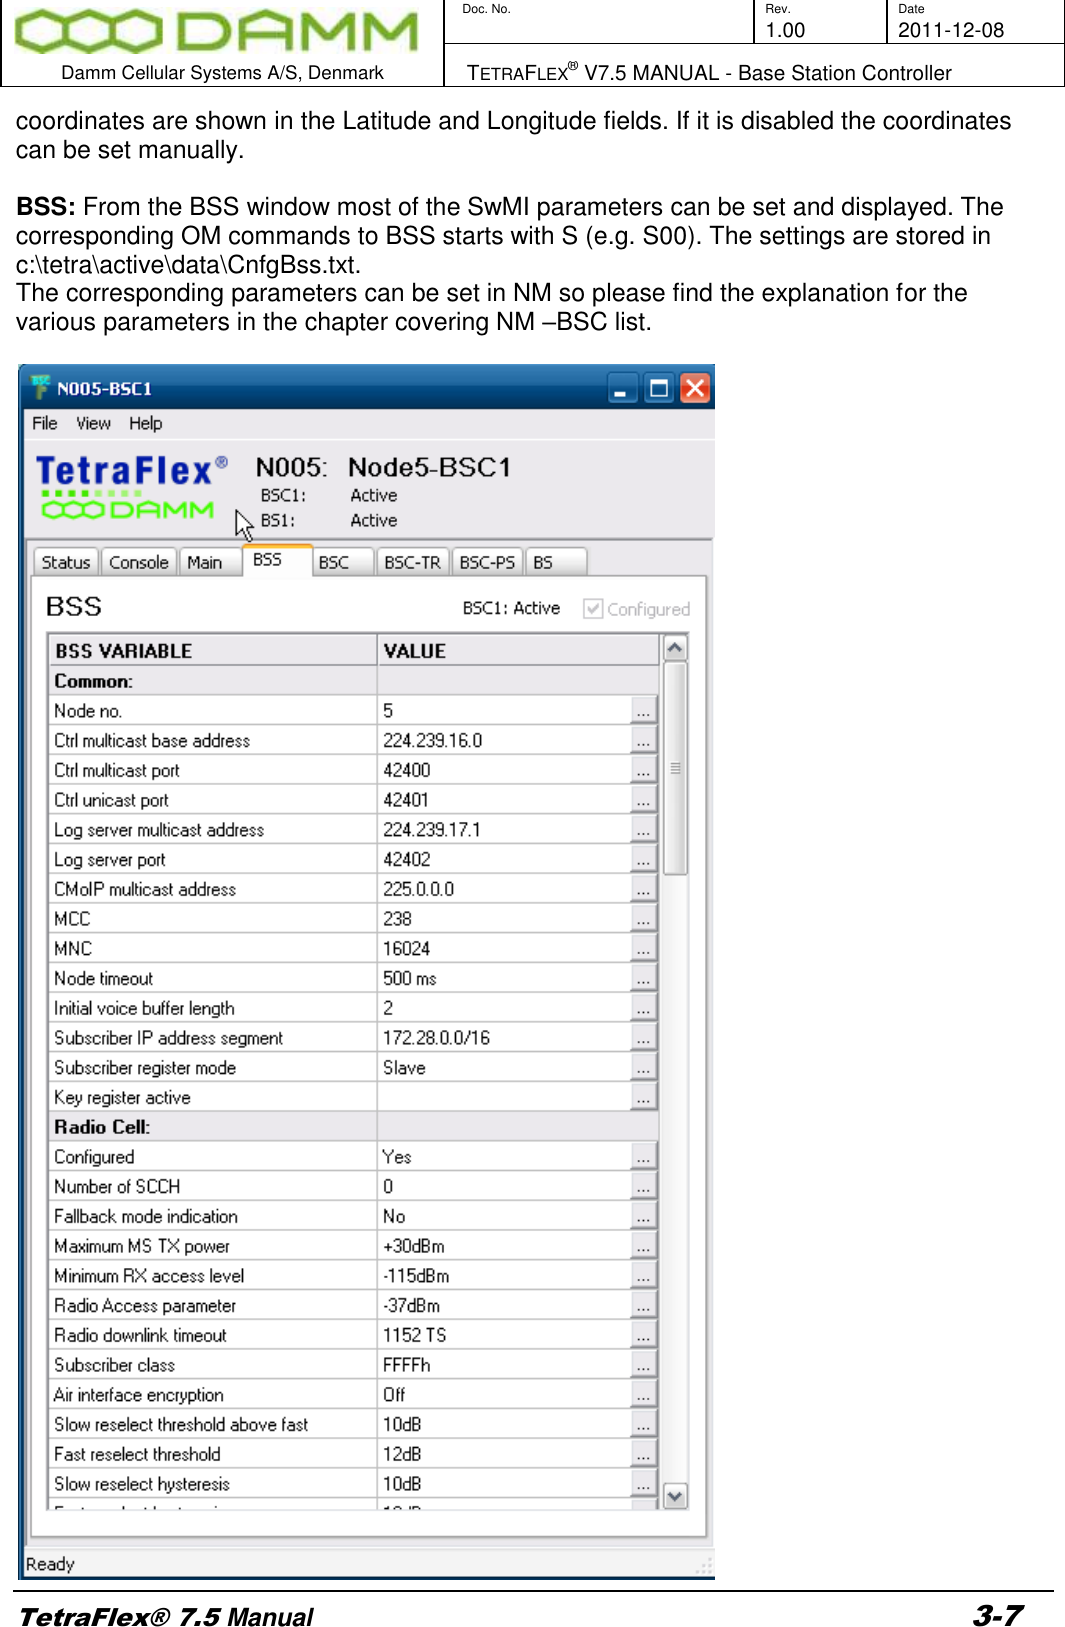        Doc. No. Rev. Date     1.00 2011-12-08  Damm Cellular Systems A/S, Denmark   TETRAFLEX® V7.5 MANUAL - Base Station Controller  TetraFlex® 7.5 Manual 3-7 coordinates are shown in the Latitude and Longitude fields. If it is disabled the coordinates can be set manually.  BSS: From the BSS window most of the SwMI parameters can be set and displayed. The corresponding OM commands to BSS starts with S (e.g. S00). The settings are stored in c:\tetra\active\data\CnfgBss.txt. The corresponding parameters can be set in NM so please find the explanation for the various parameters in the chapter covering NM –BSC list.   